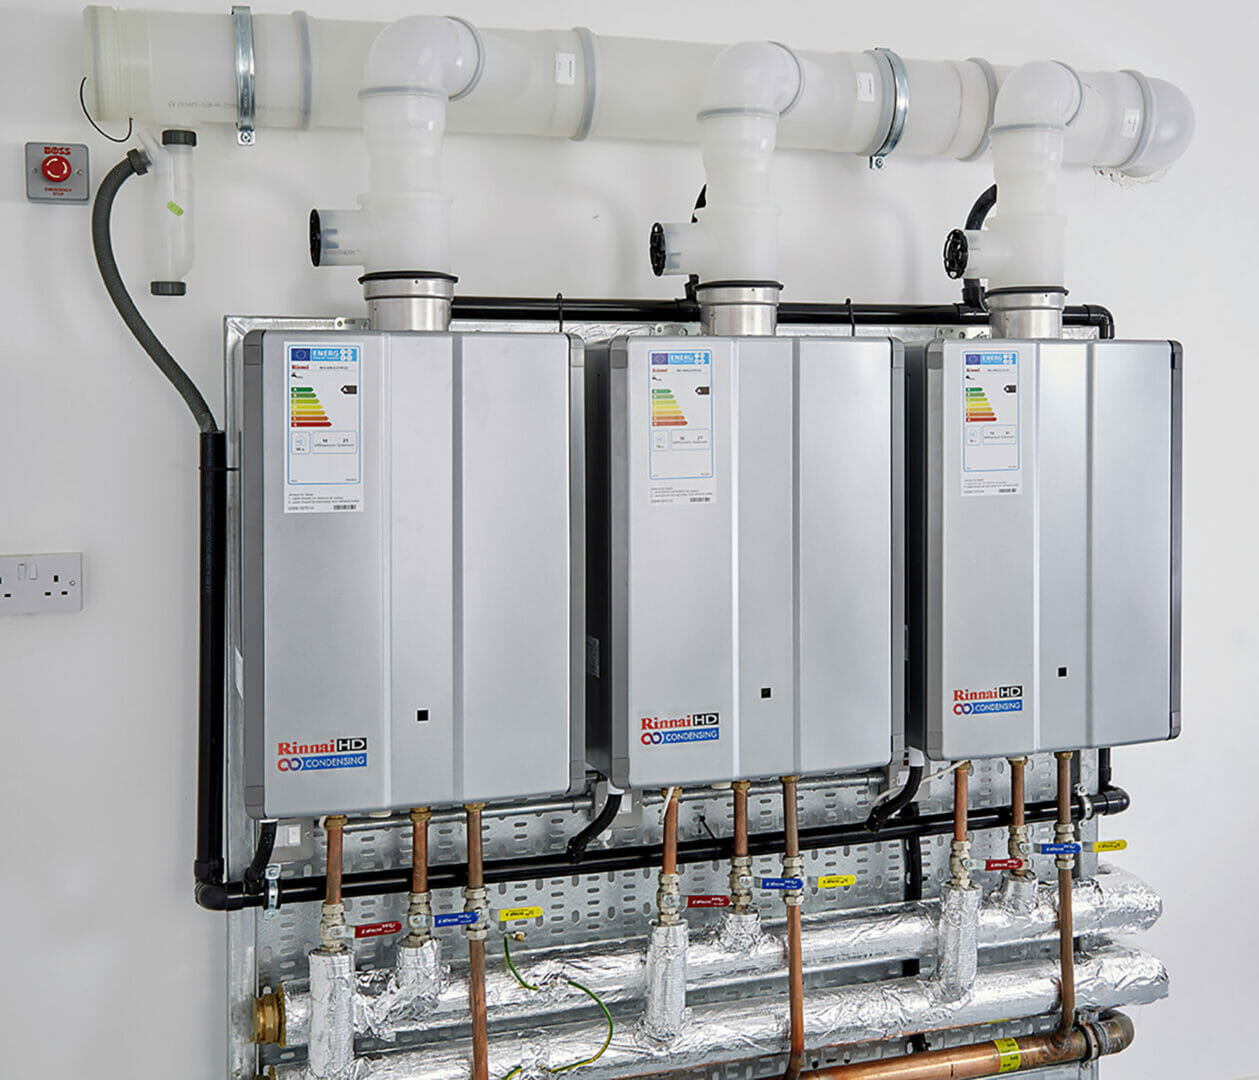 RINNAI SYSTEM THINKING BRINGS BUSINESS SPECIFIC HOT WATER SYSTEMS